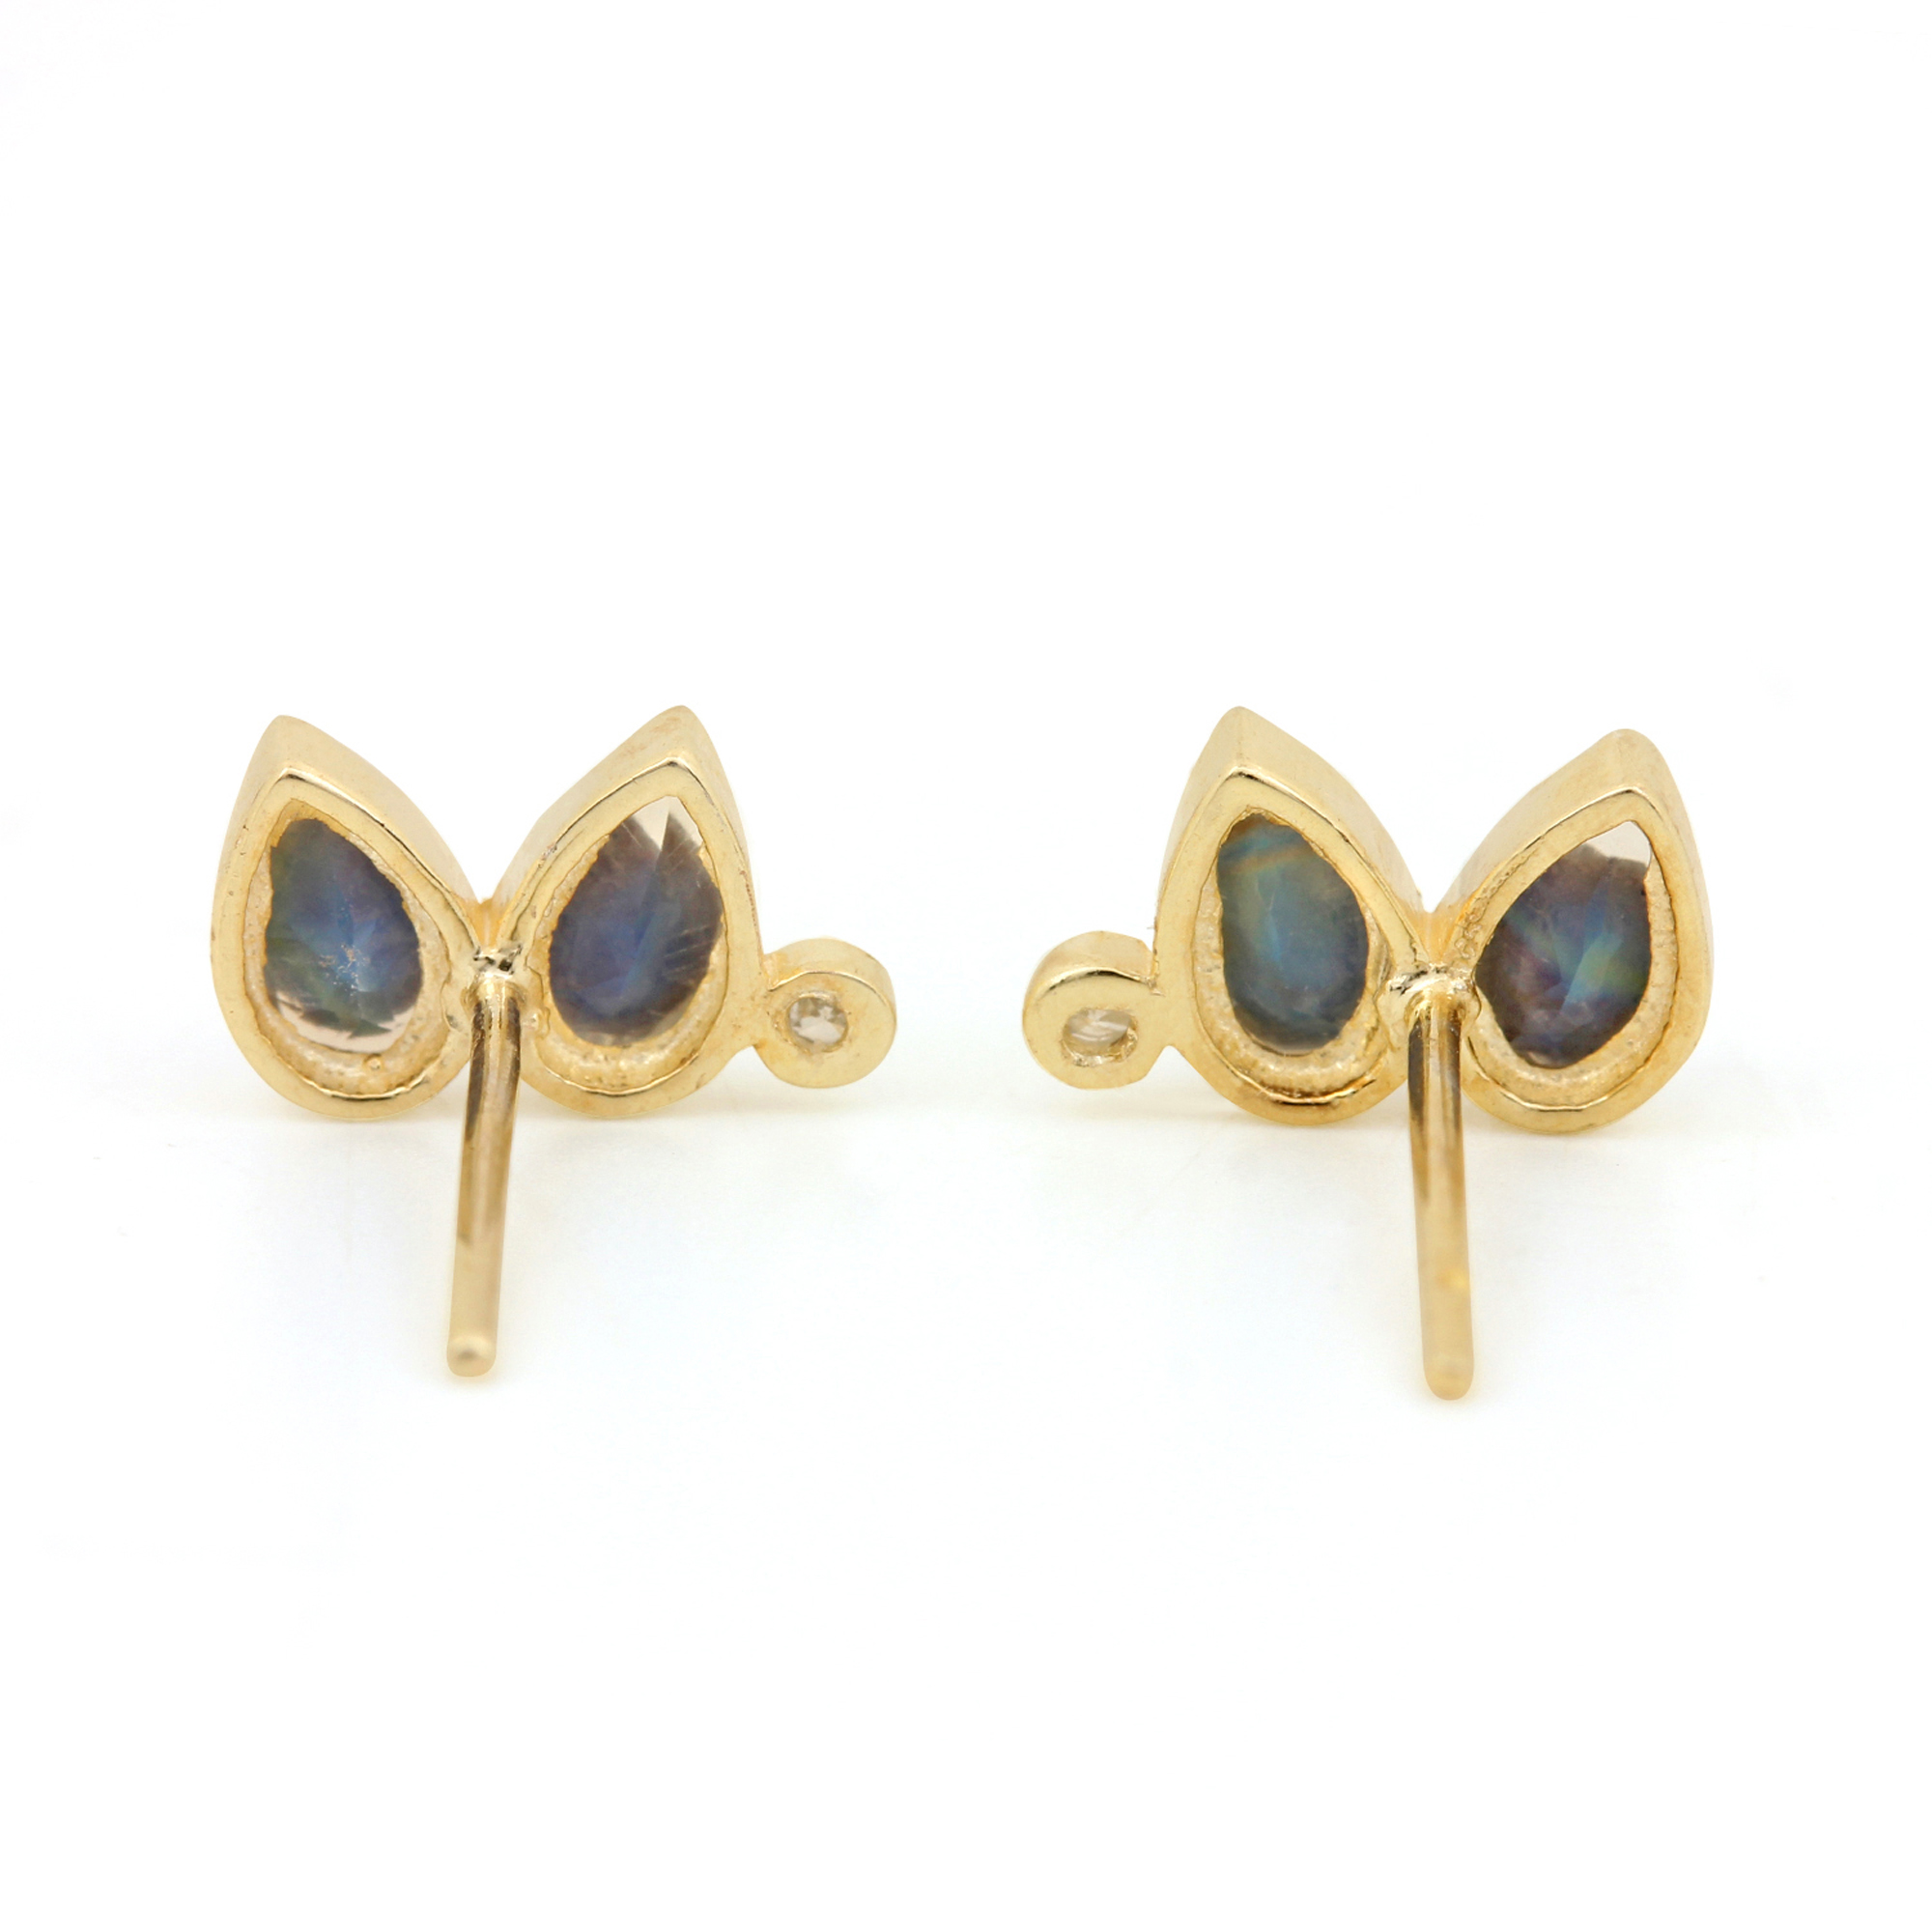 14k Gold Solitaire Stud Earrings Adorned With Diamond & Moonstone